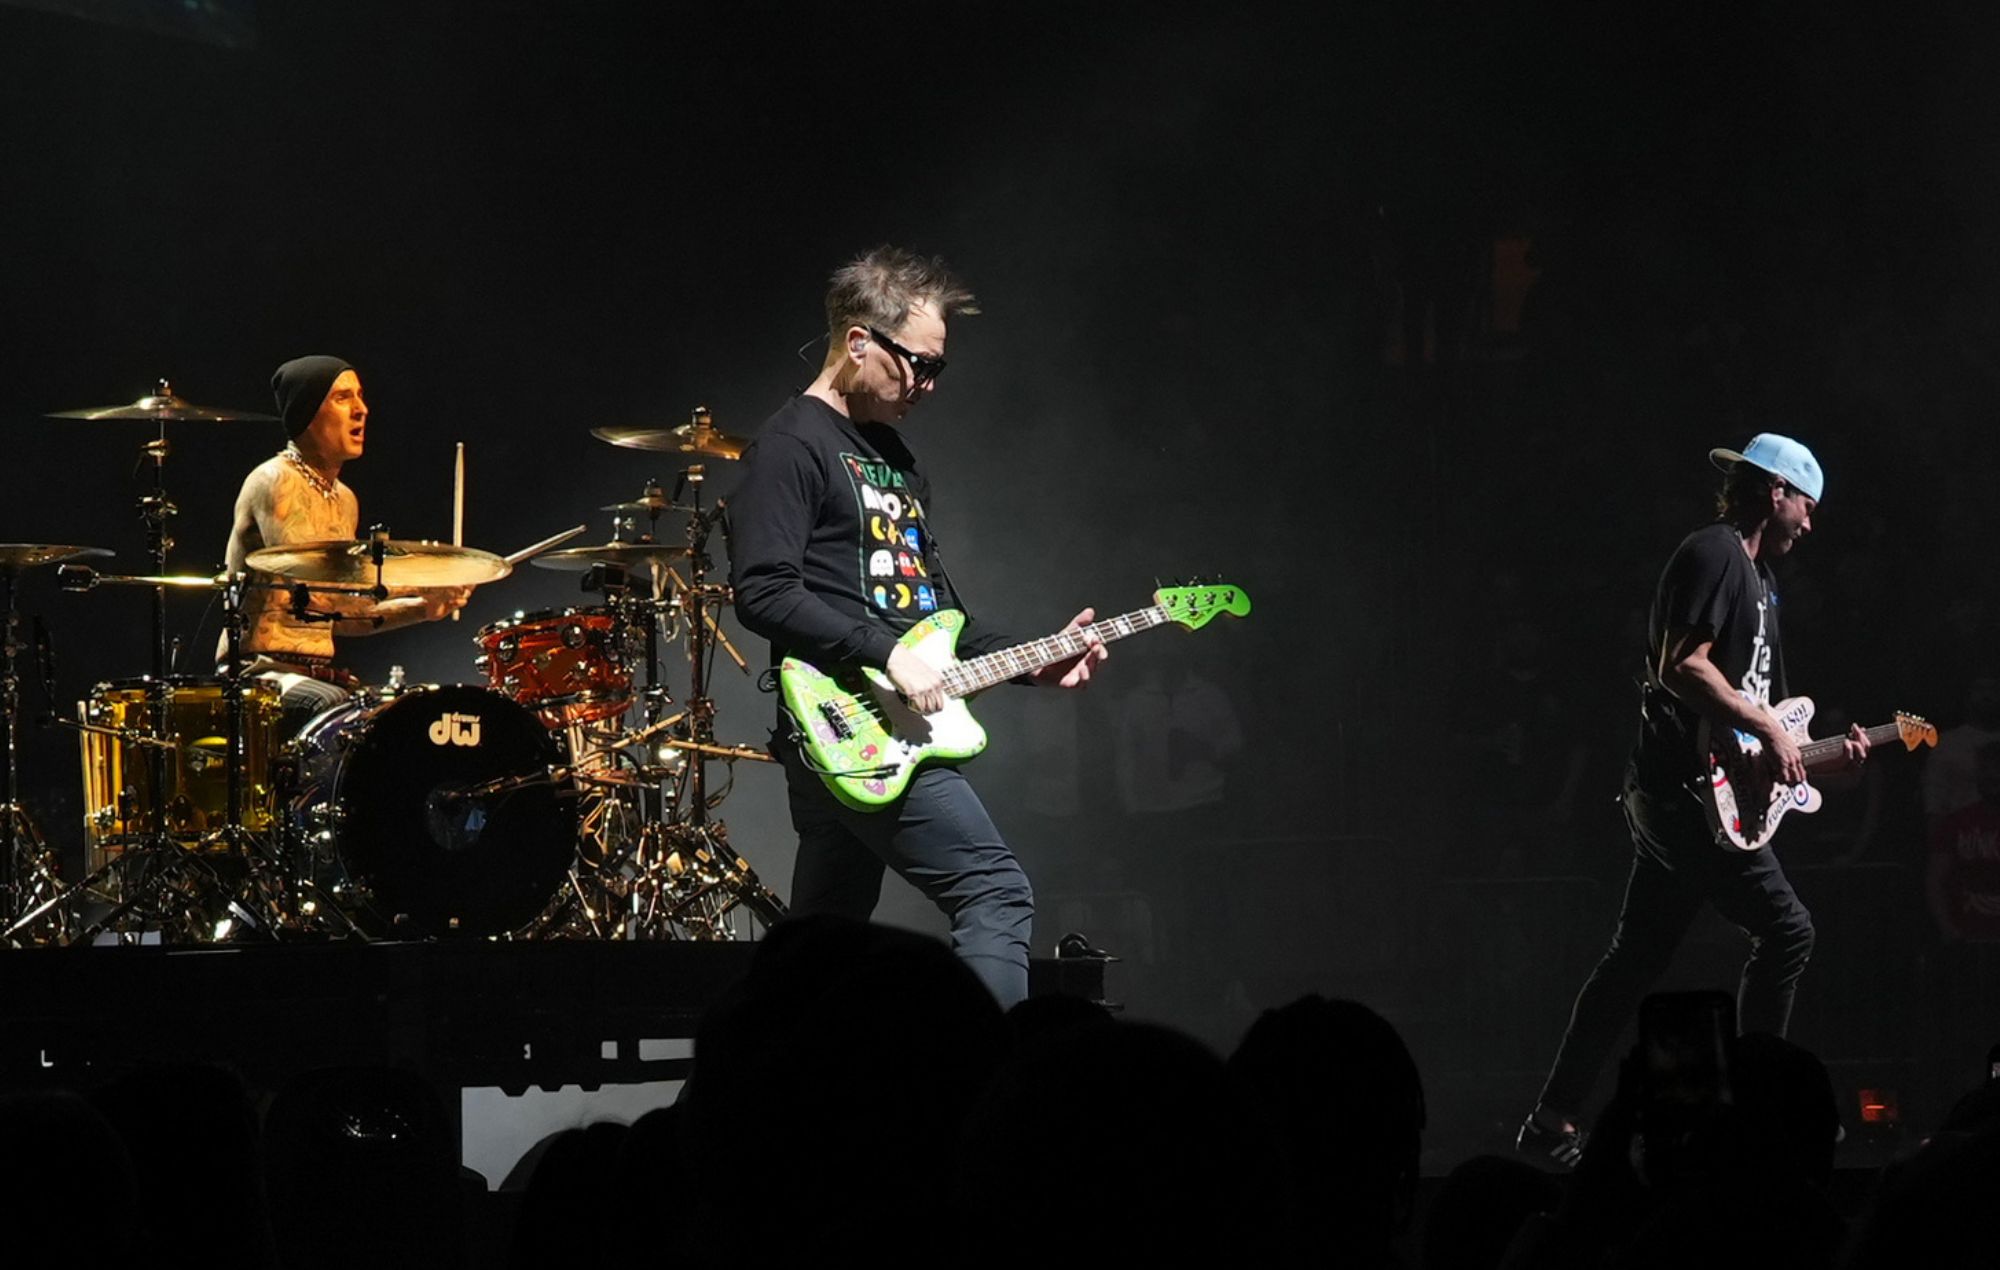 Travis Barker, Mark Hoppus and Tom DeLonge of Blink-182 perform onstage at Madison Square Garden on May 19, 2023 in New York City